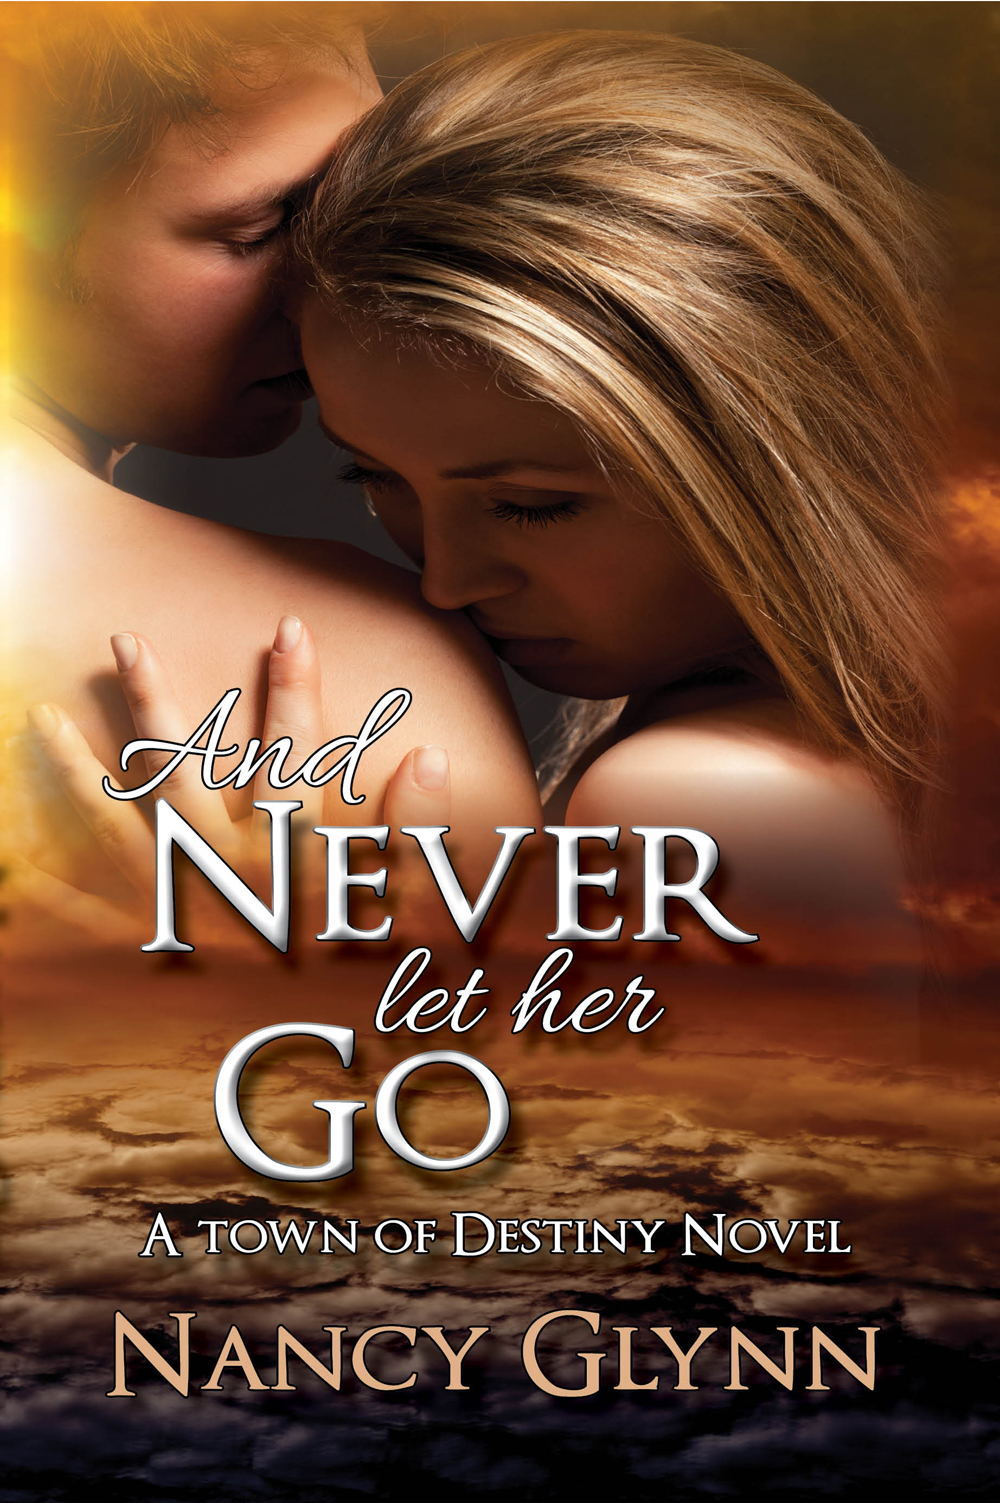 FREE: And Never Let Her Go by Nancy Glynn